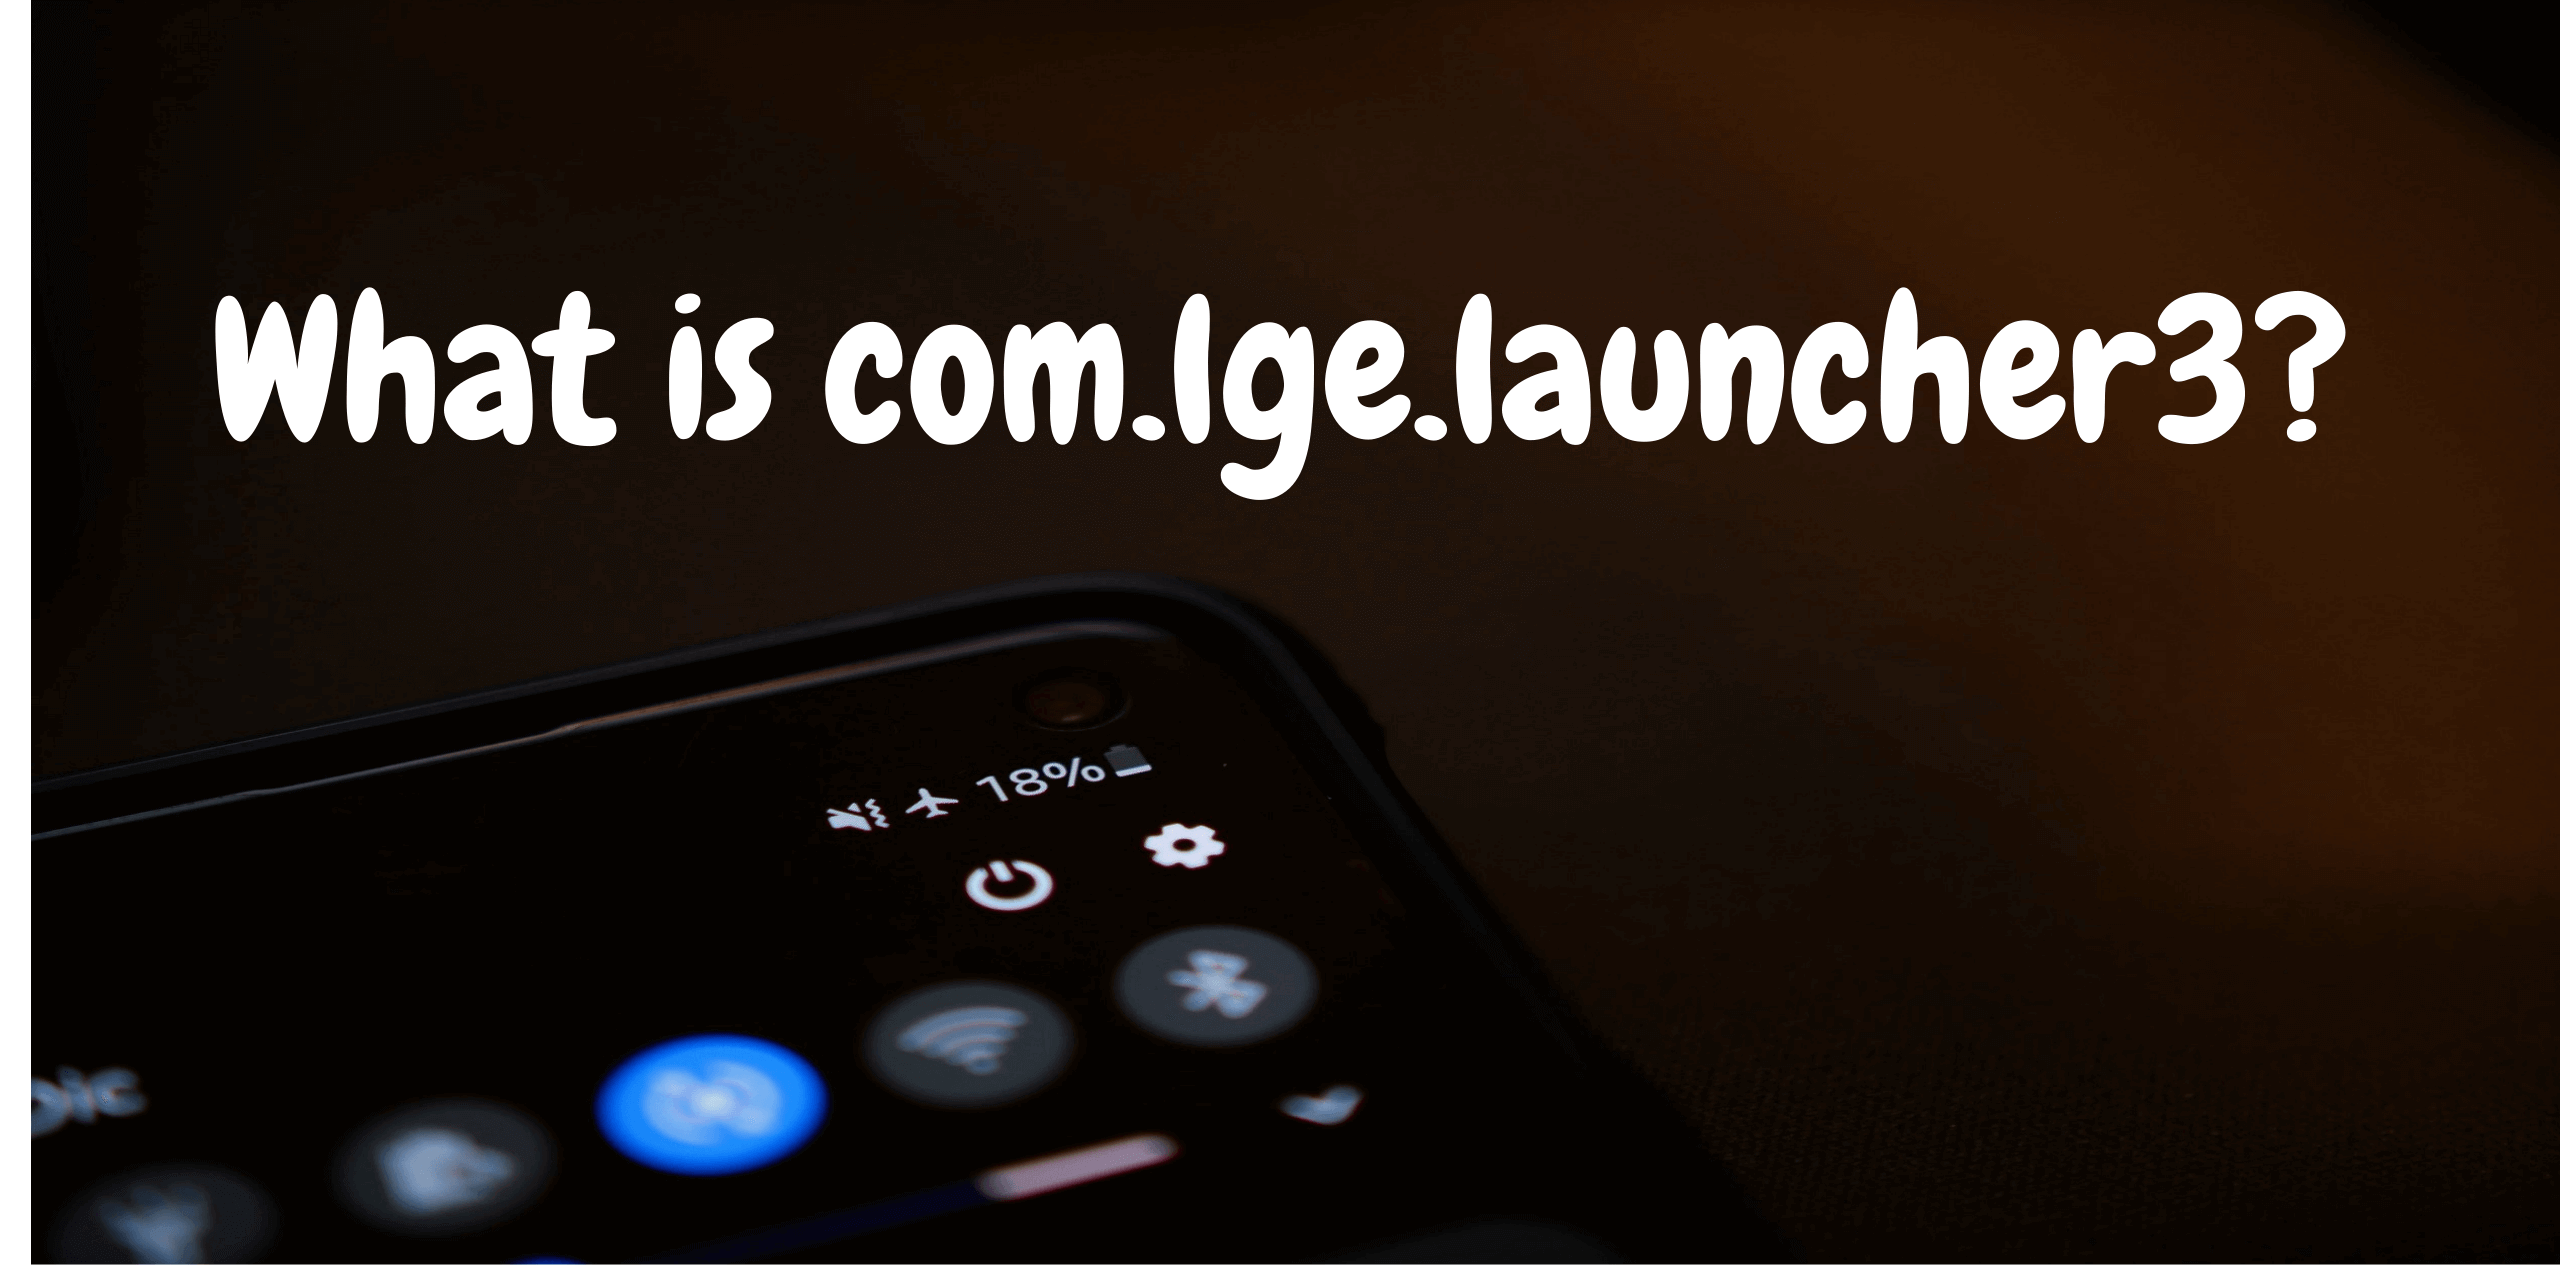 1. What Is com. lge.launcher3?